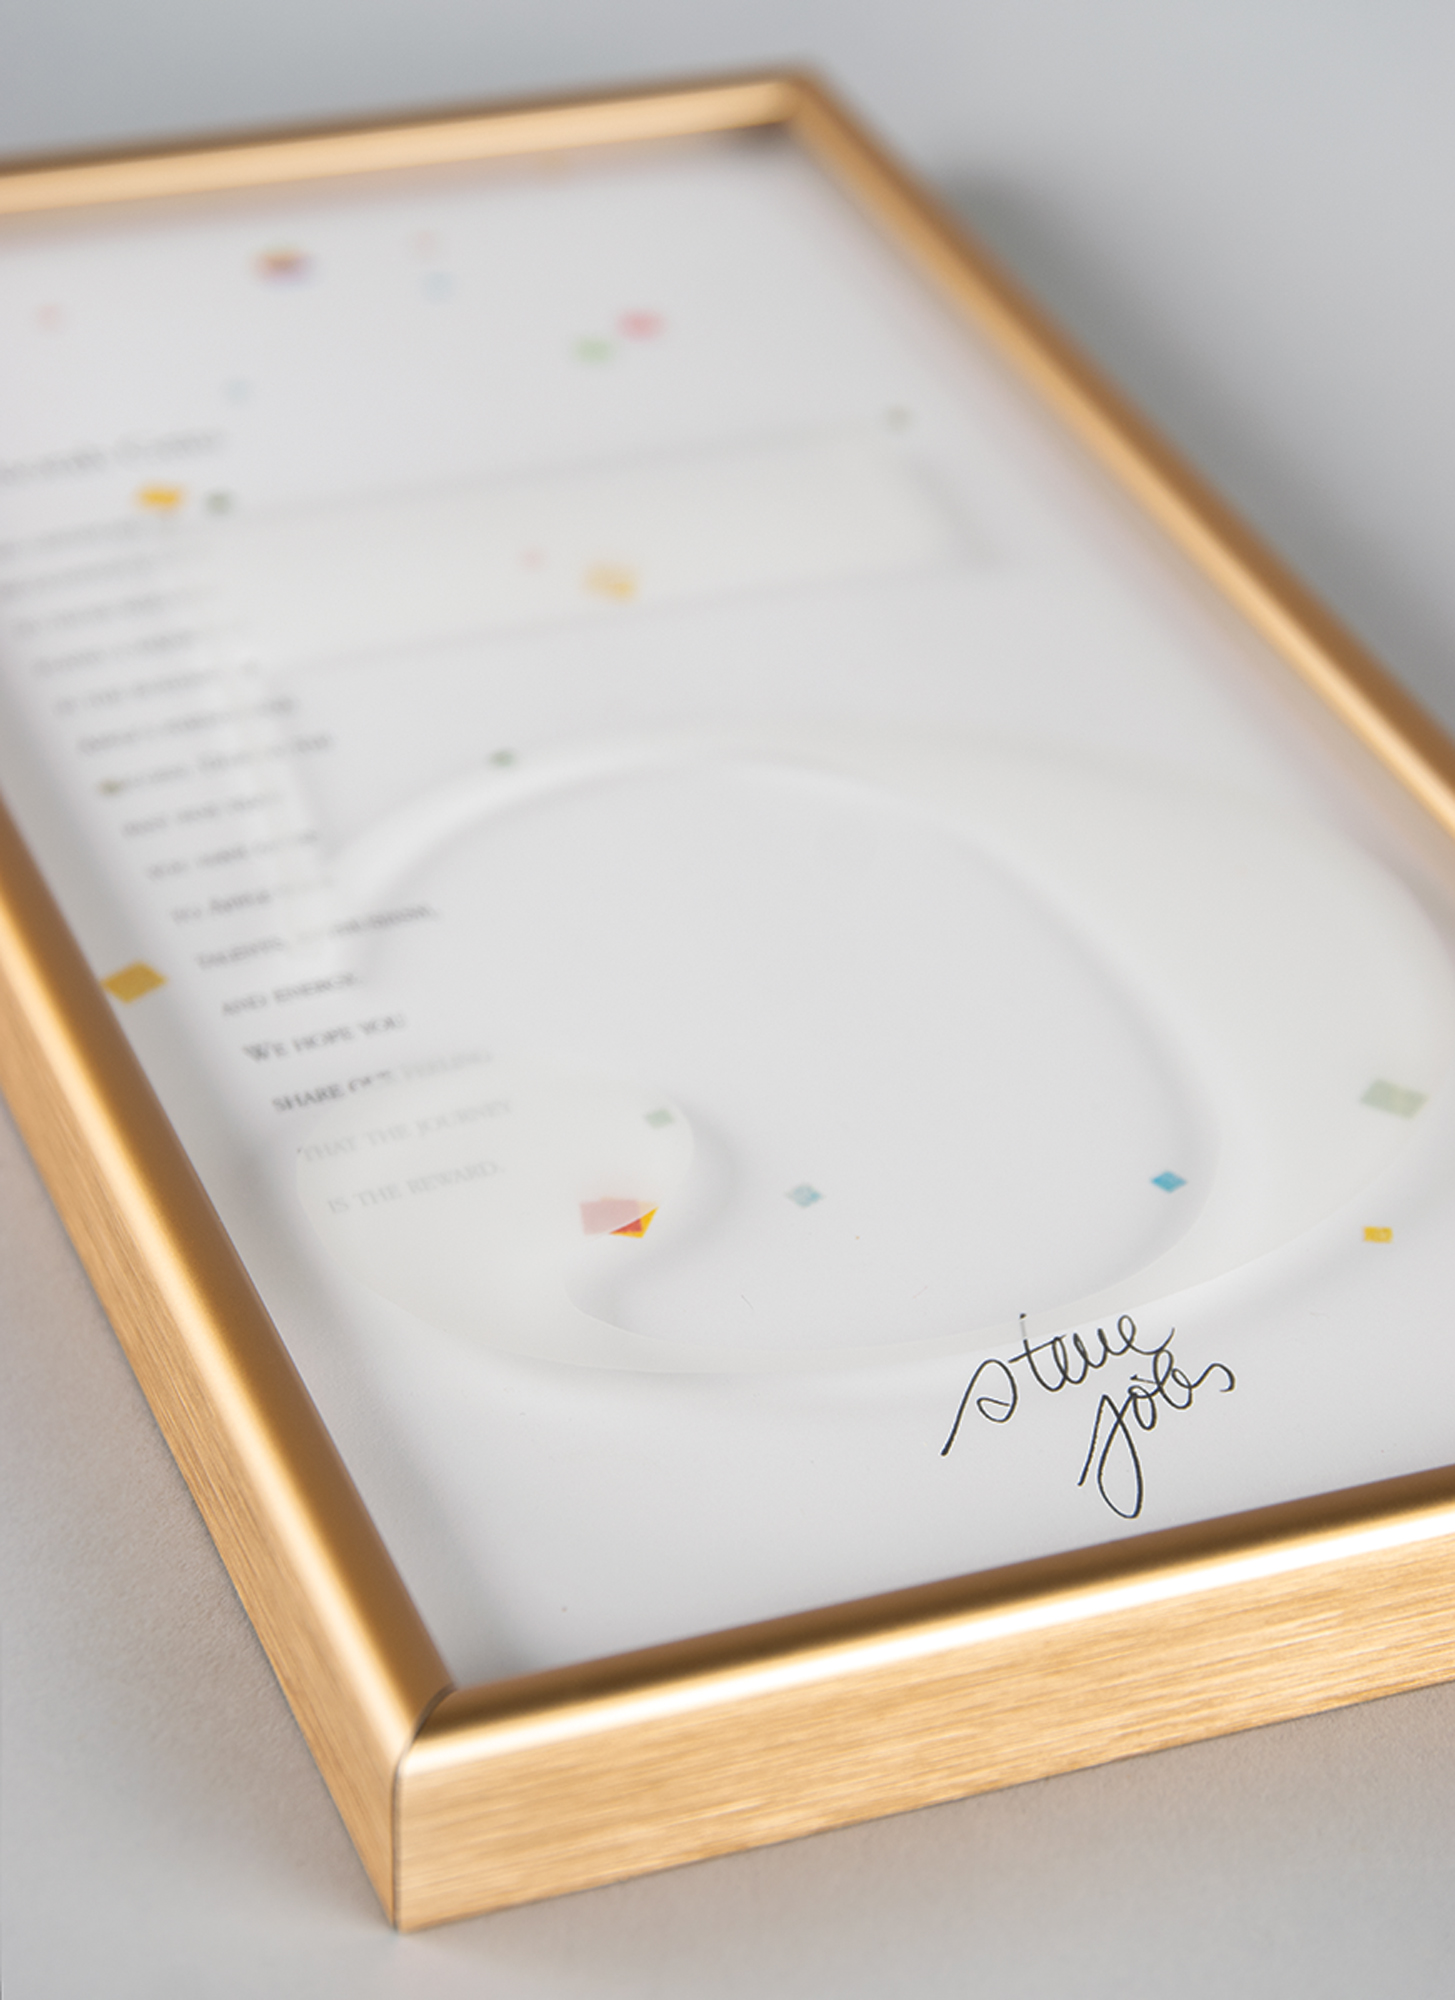 Lot #5081 Steve Jobs Signed Apple 5-Year Service Award for Employee whoplayed a major role in the building of Apple's phenomenal success